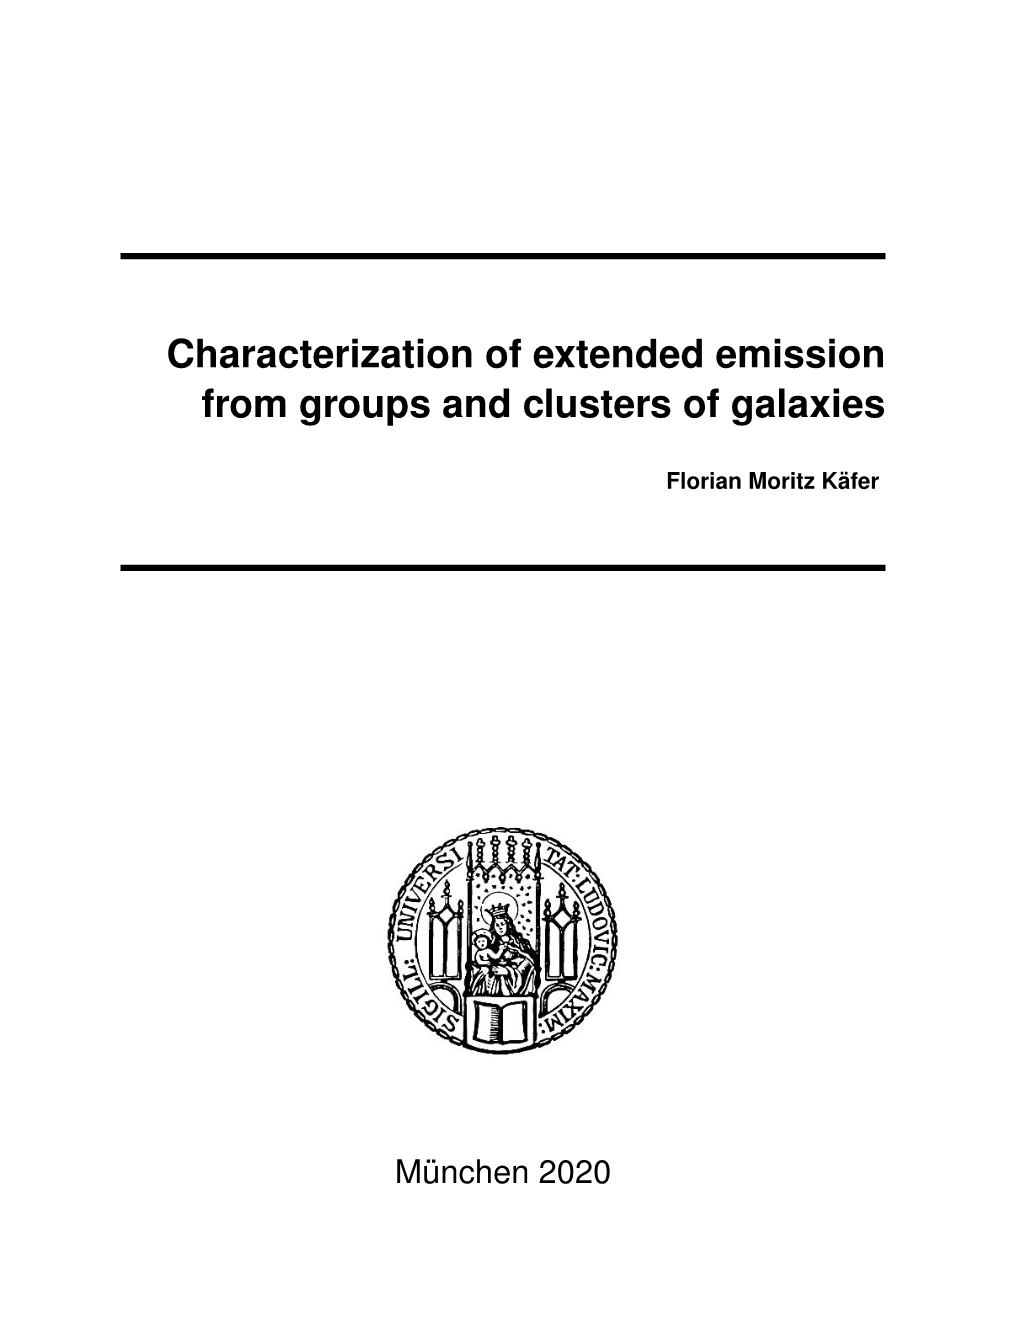 Characterization of Extended Emission from Groups and Clusters of Galaxies